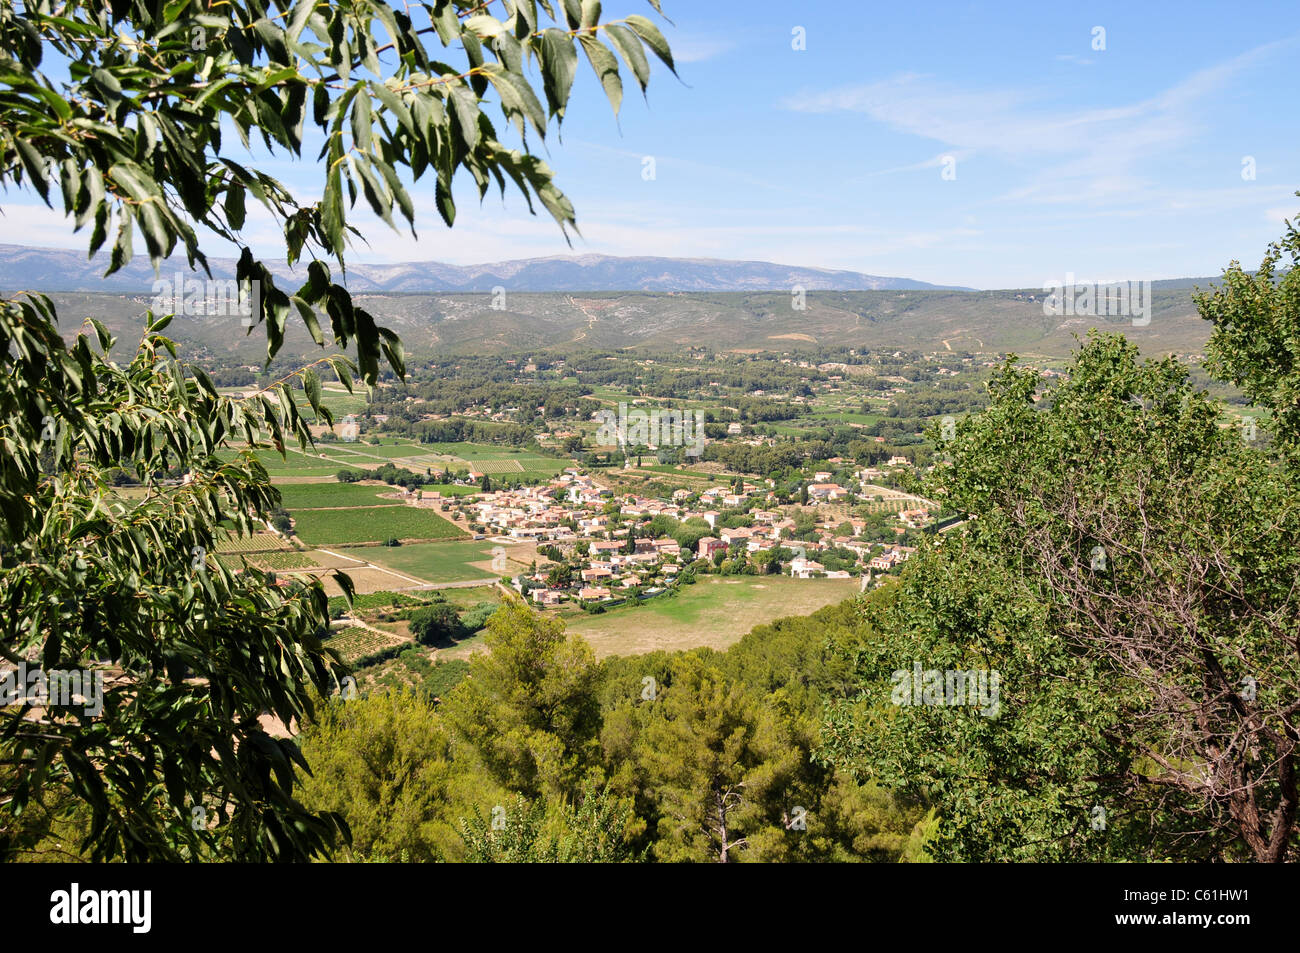 View of the Bandol region from the medieval town of Le Castellet, near Toulon, France Stock Photo